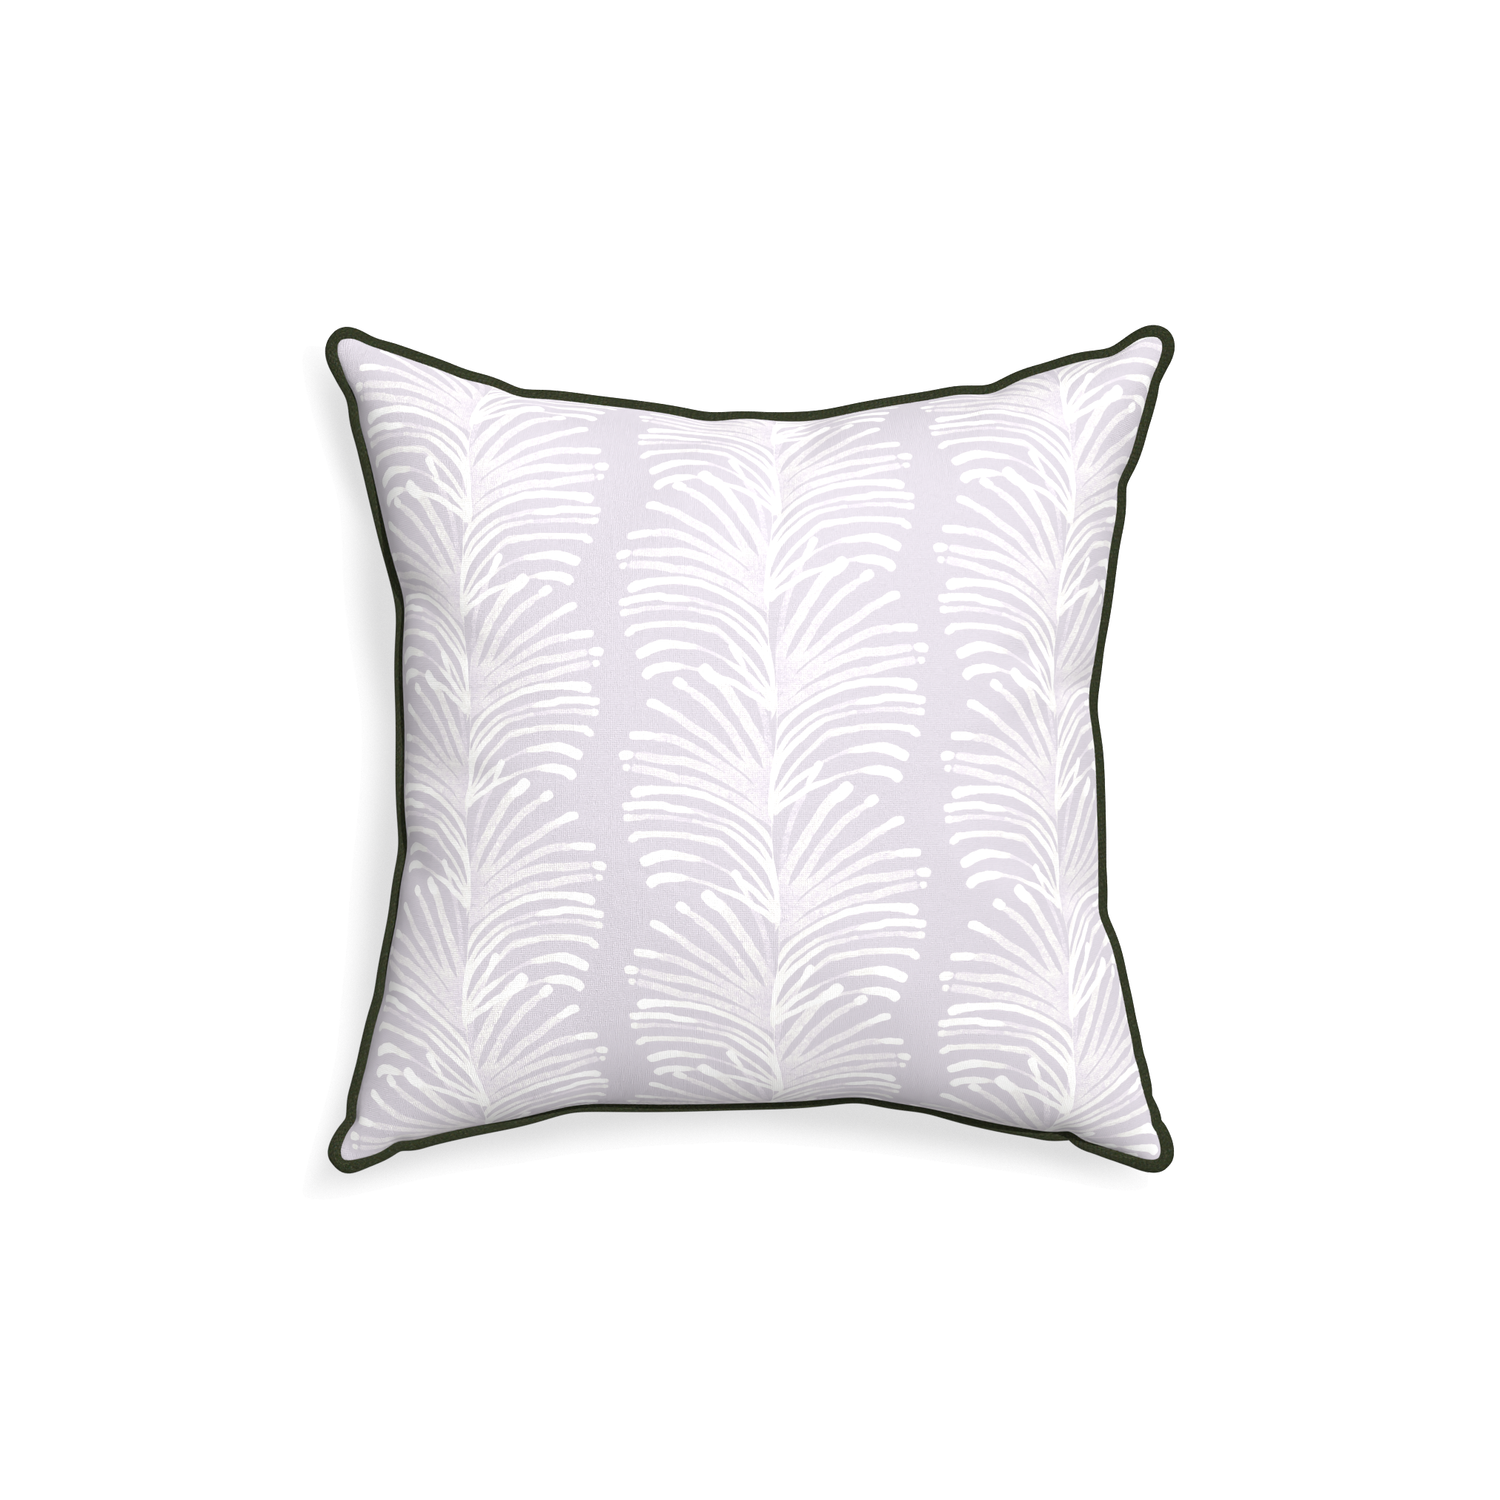 18-square emma lavender custom lavender botanical stripepillow with f piping on white background